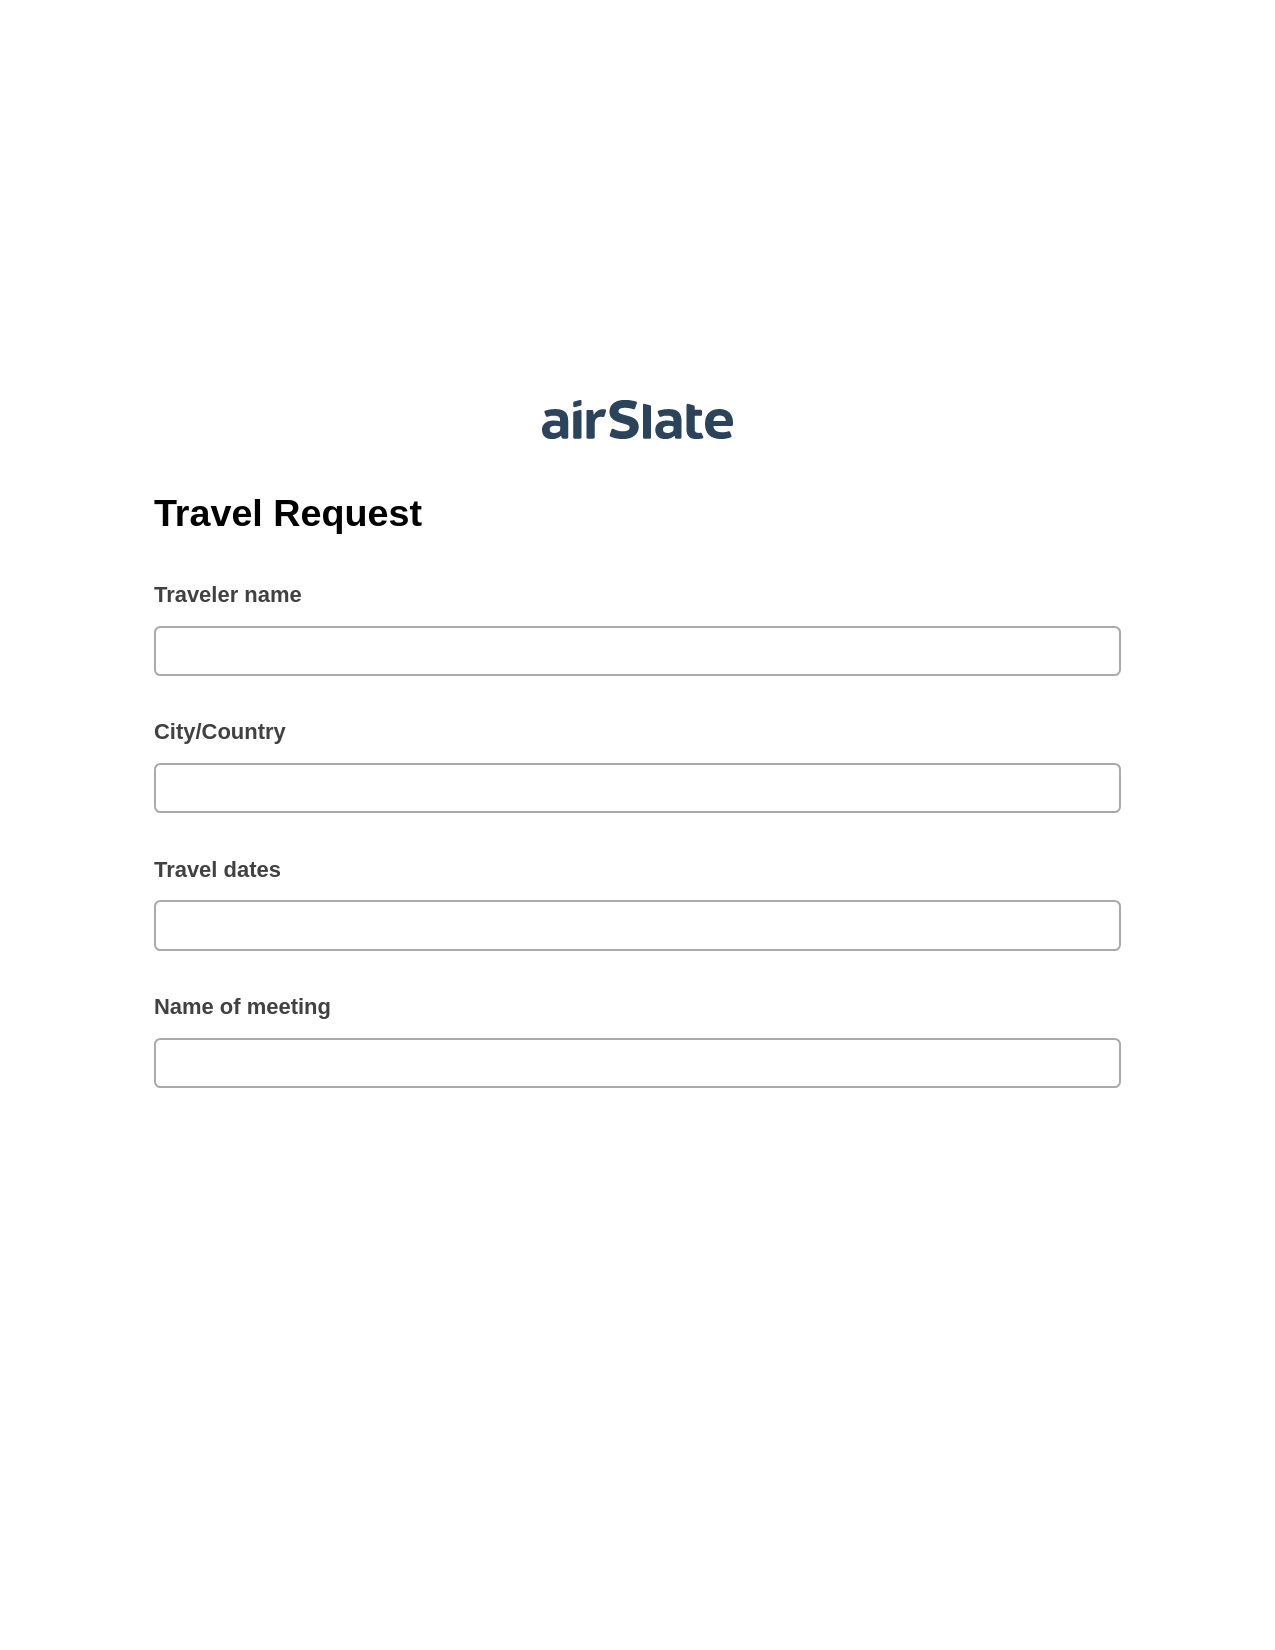 Travel Request Pre-fill from CSV File Bot, Remove Tags From Slate Bot, Post-finish Document Bot